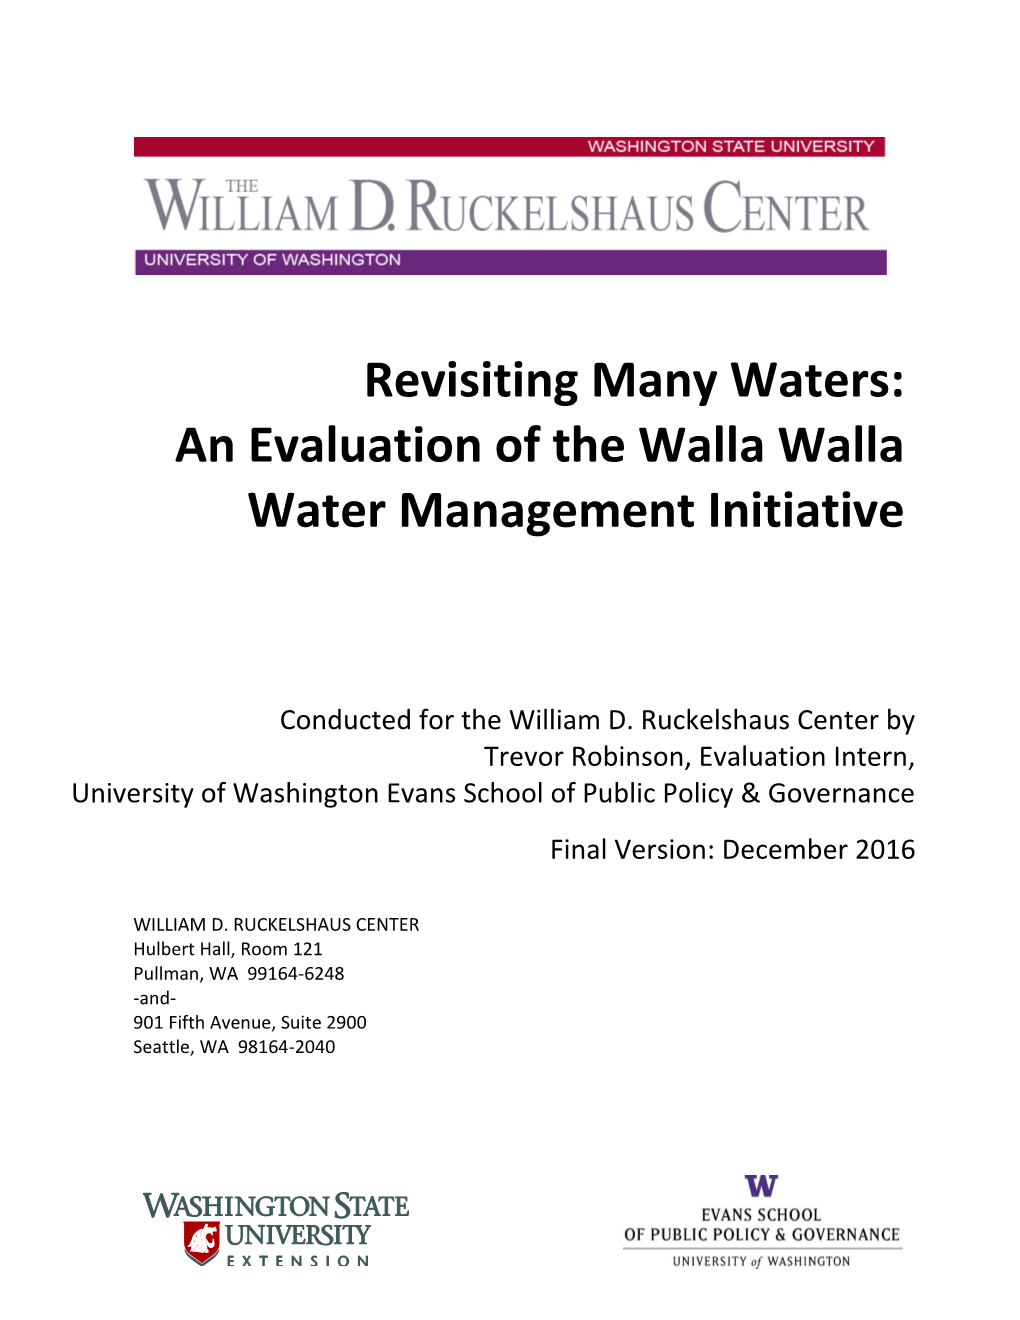 An Evaluation of the Walla Walla Water Management Initiative